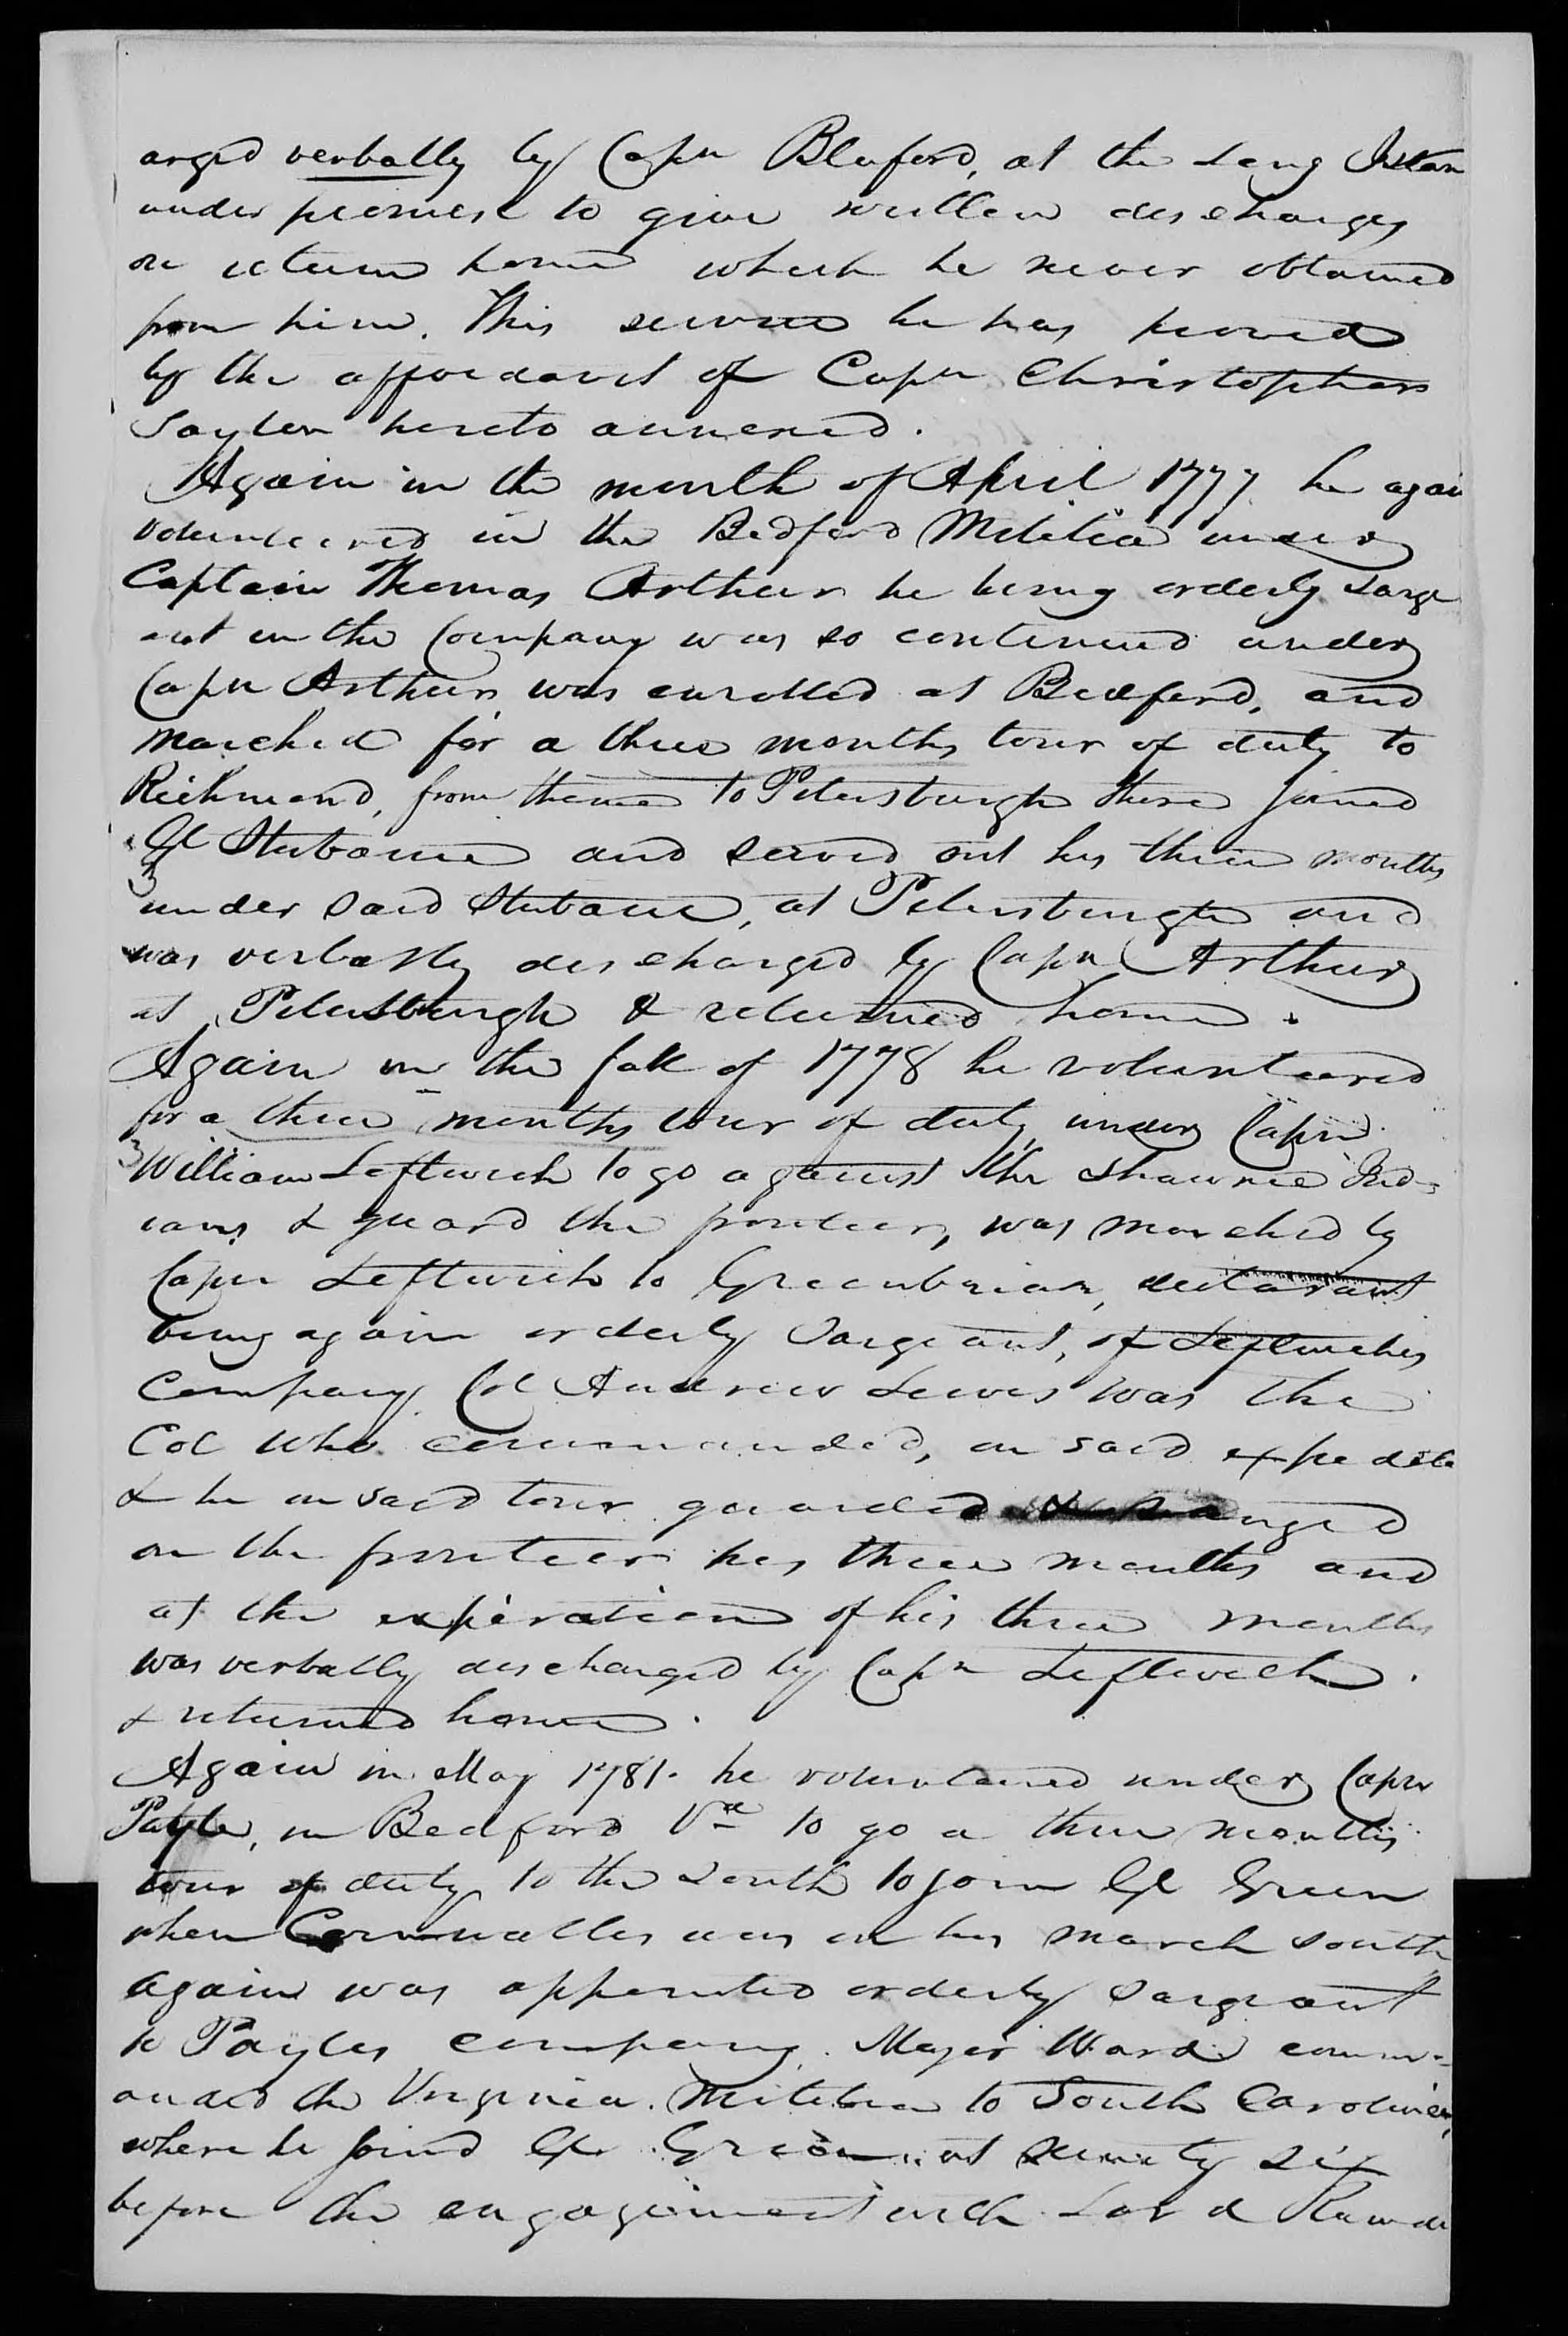 Application for a Veteran's Pension from John Edwards, 9 September 1833, page 2